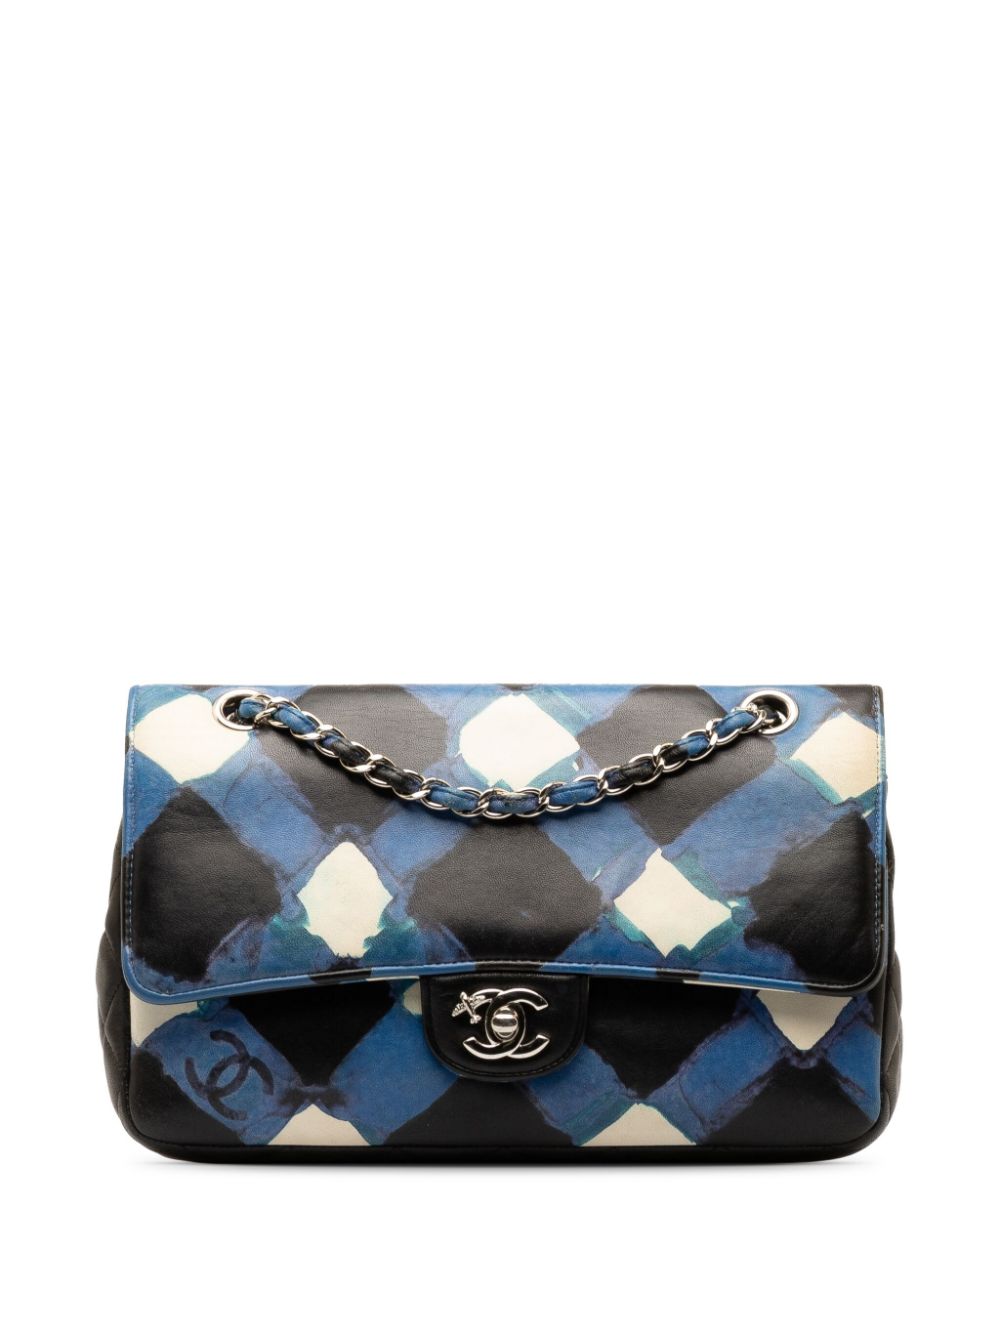 Pre-owned Chanel 2016-2017 Medium Classic Airline Double Flap Shoulder Bag In Blue